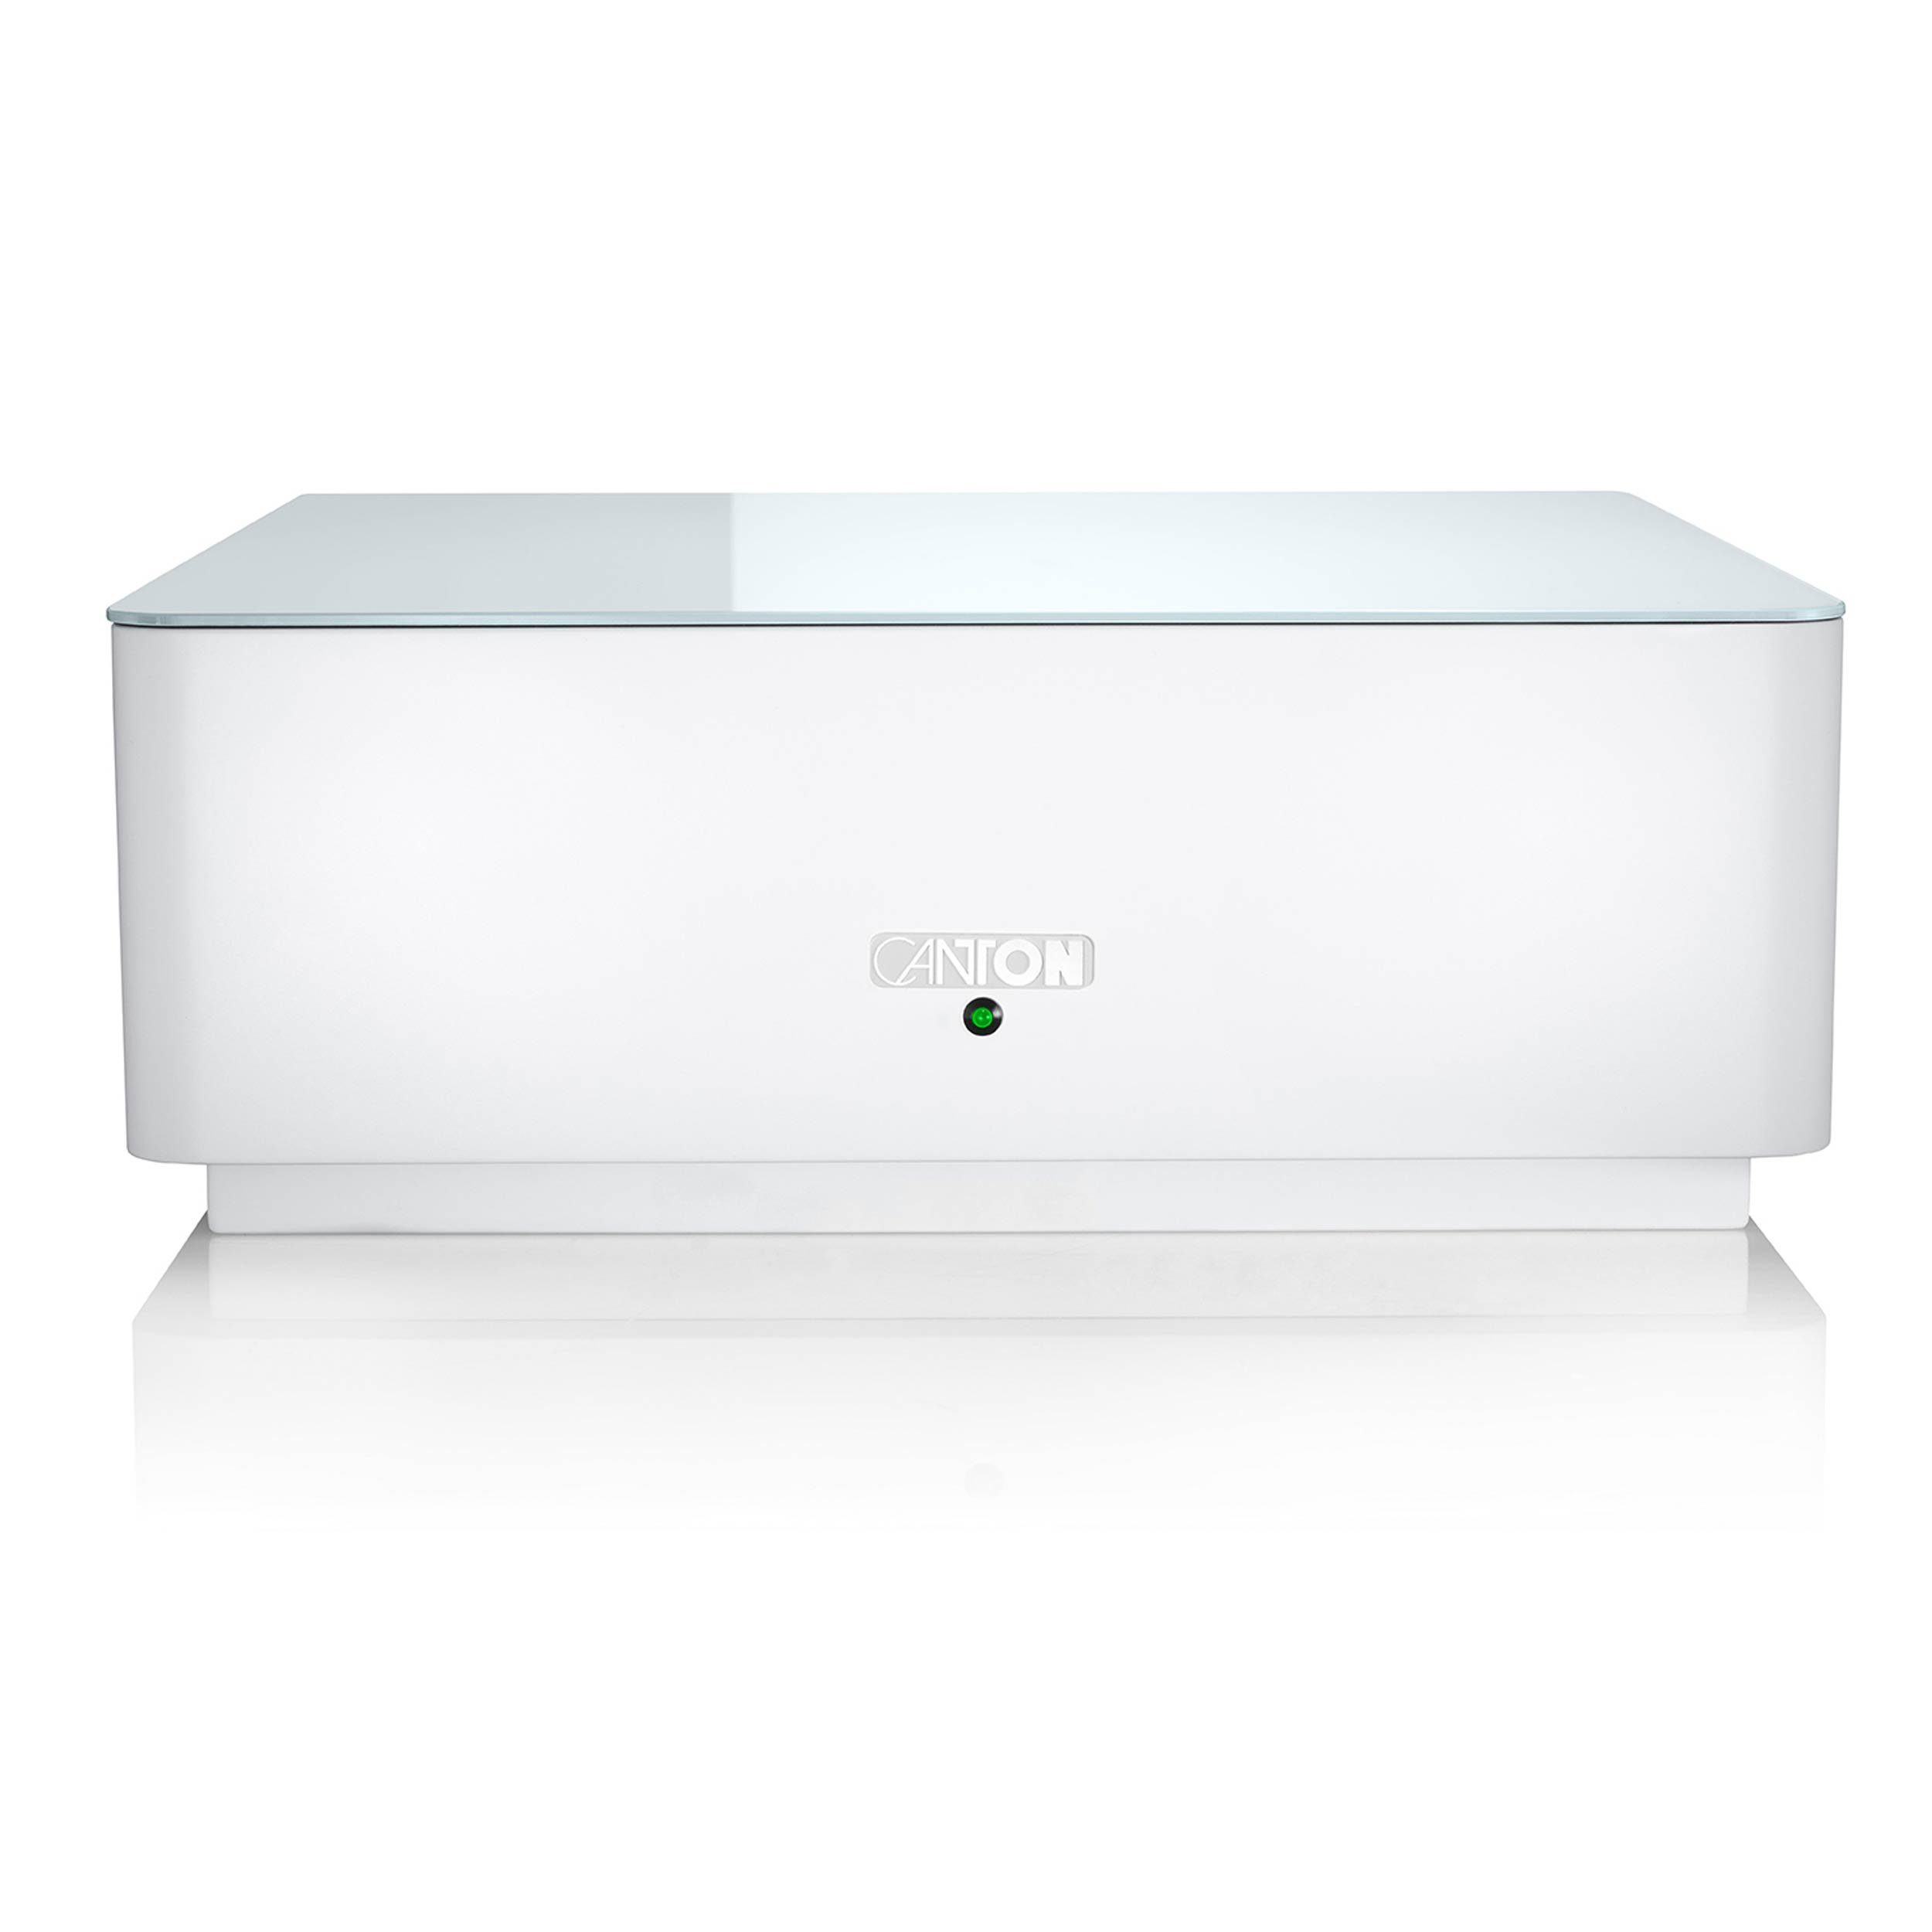 CANTON Smart Sub 10 weiss Subwoofer